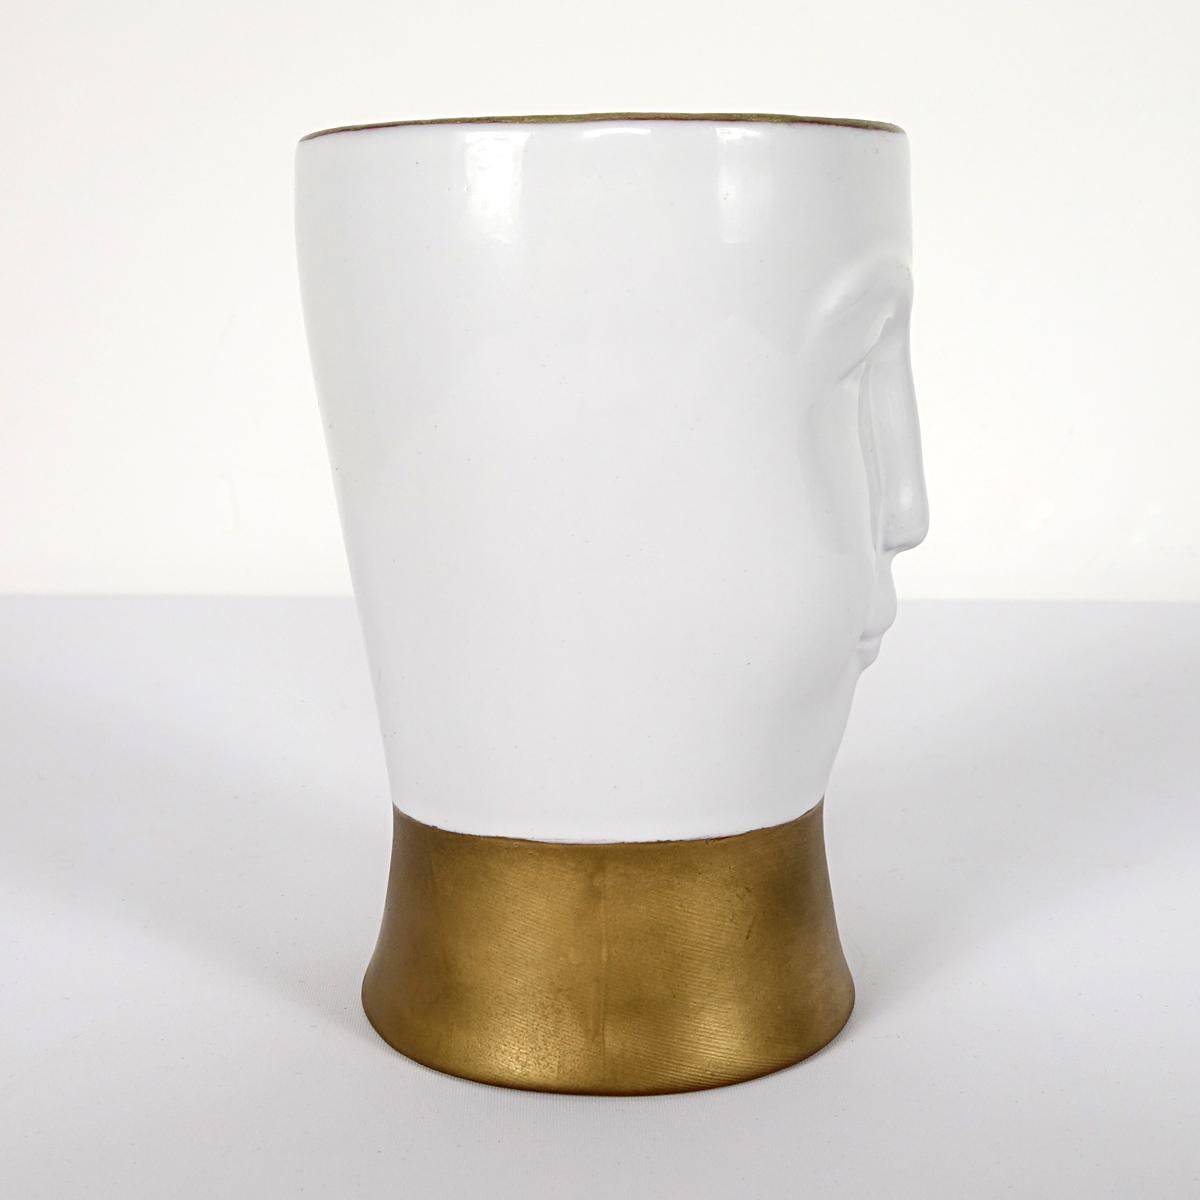 20th Century Postmodern Gilded Ceramic Vase with a Face Designed by Fornasetti Milano For Sale